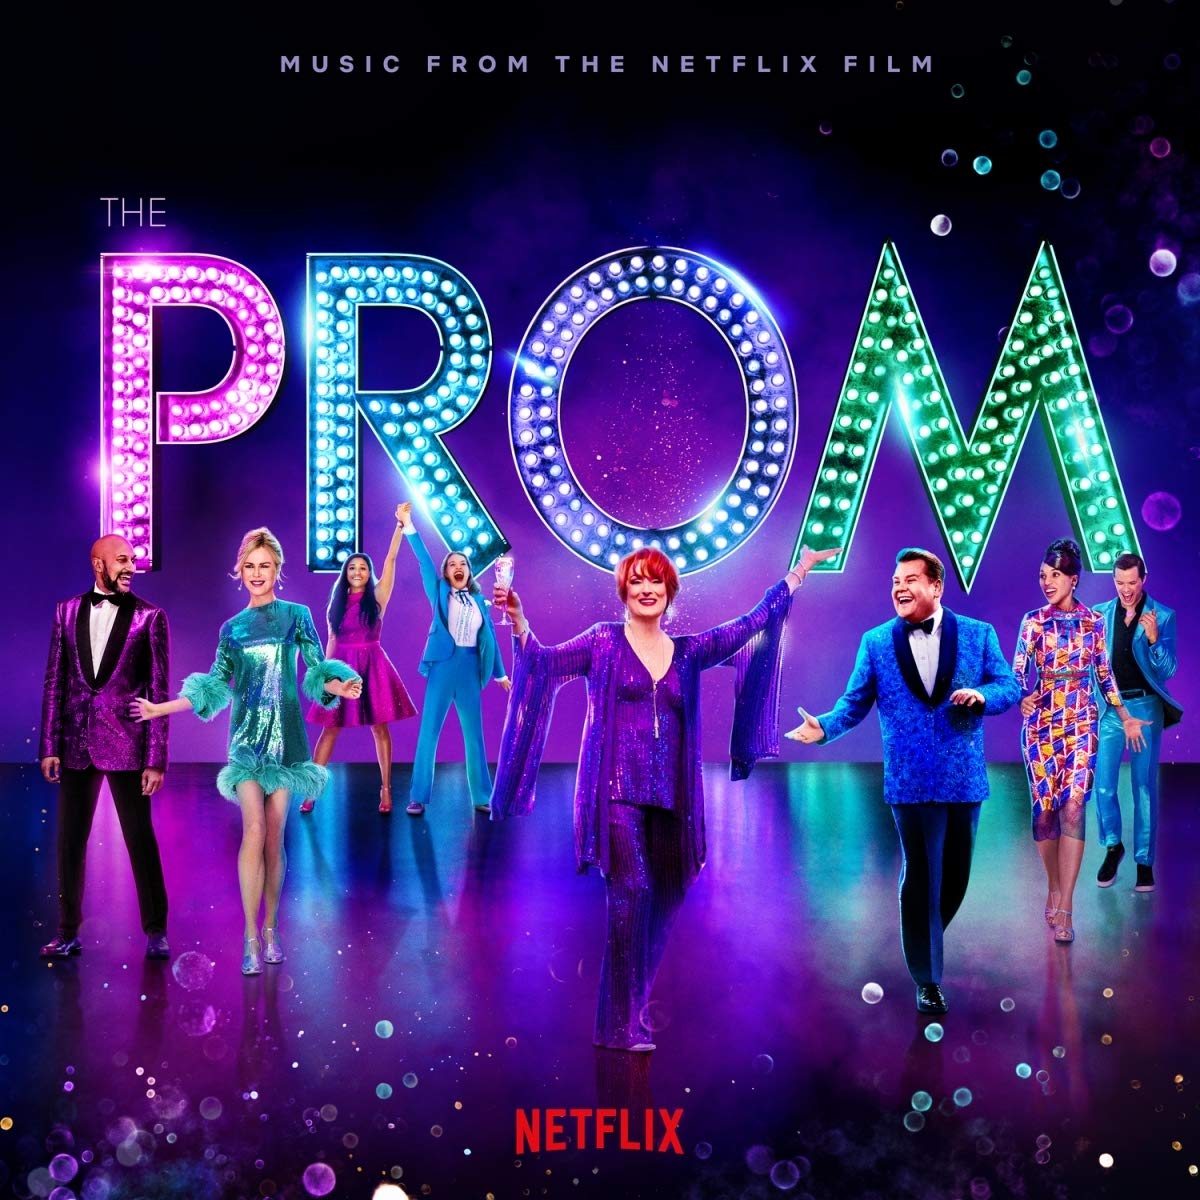 THE CAST OF NETFLIX'S "THE PROM" - The Prom (O.S.T.) - 2LP - Purple Vinyl